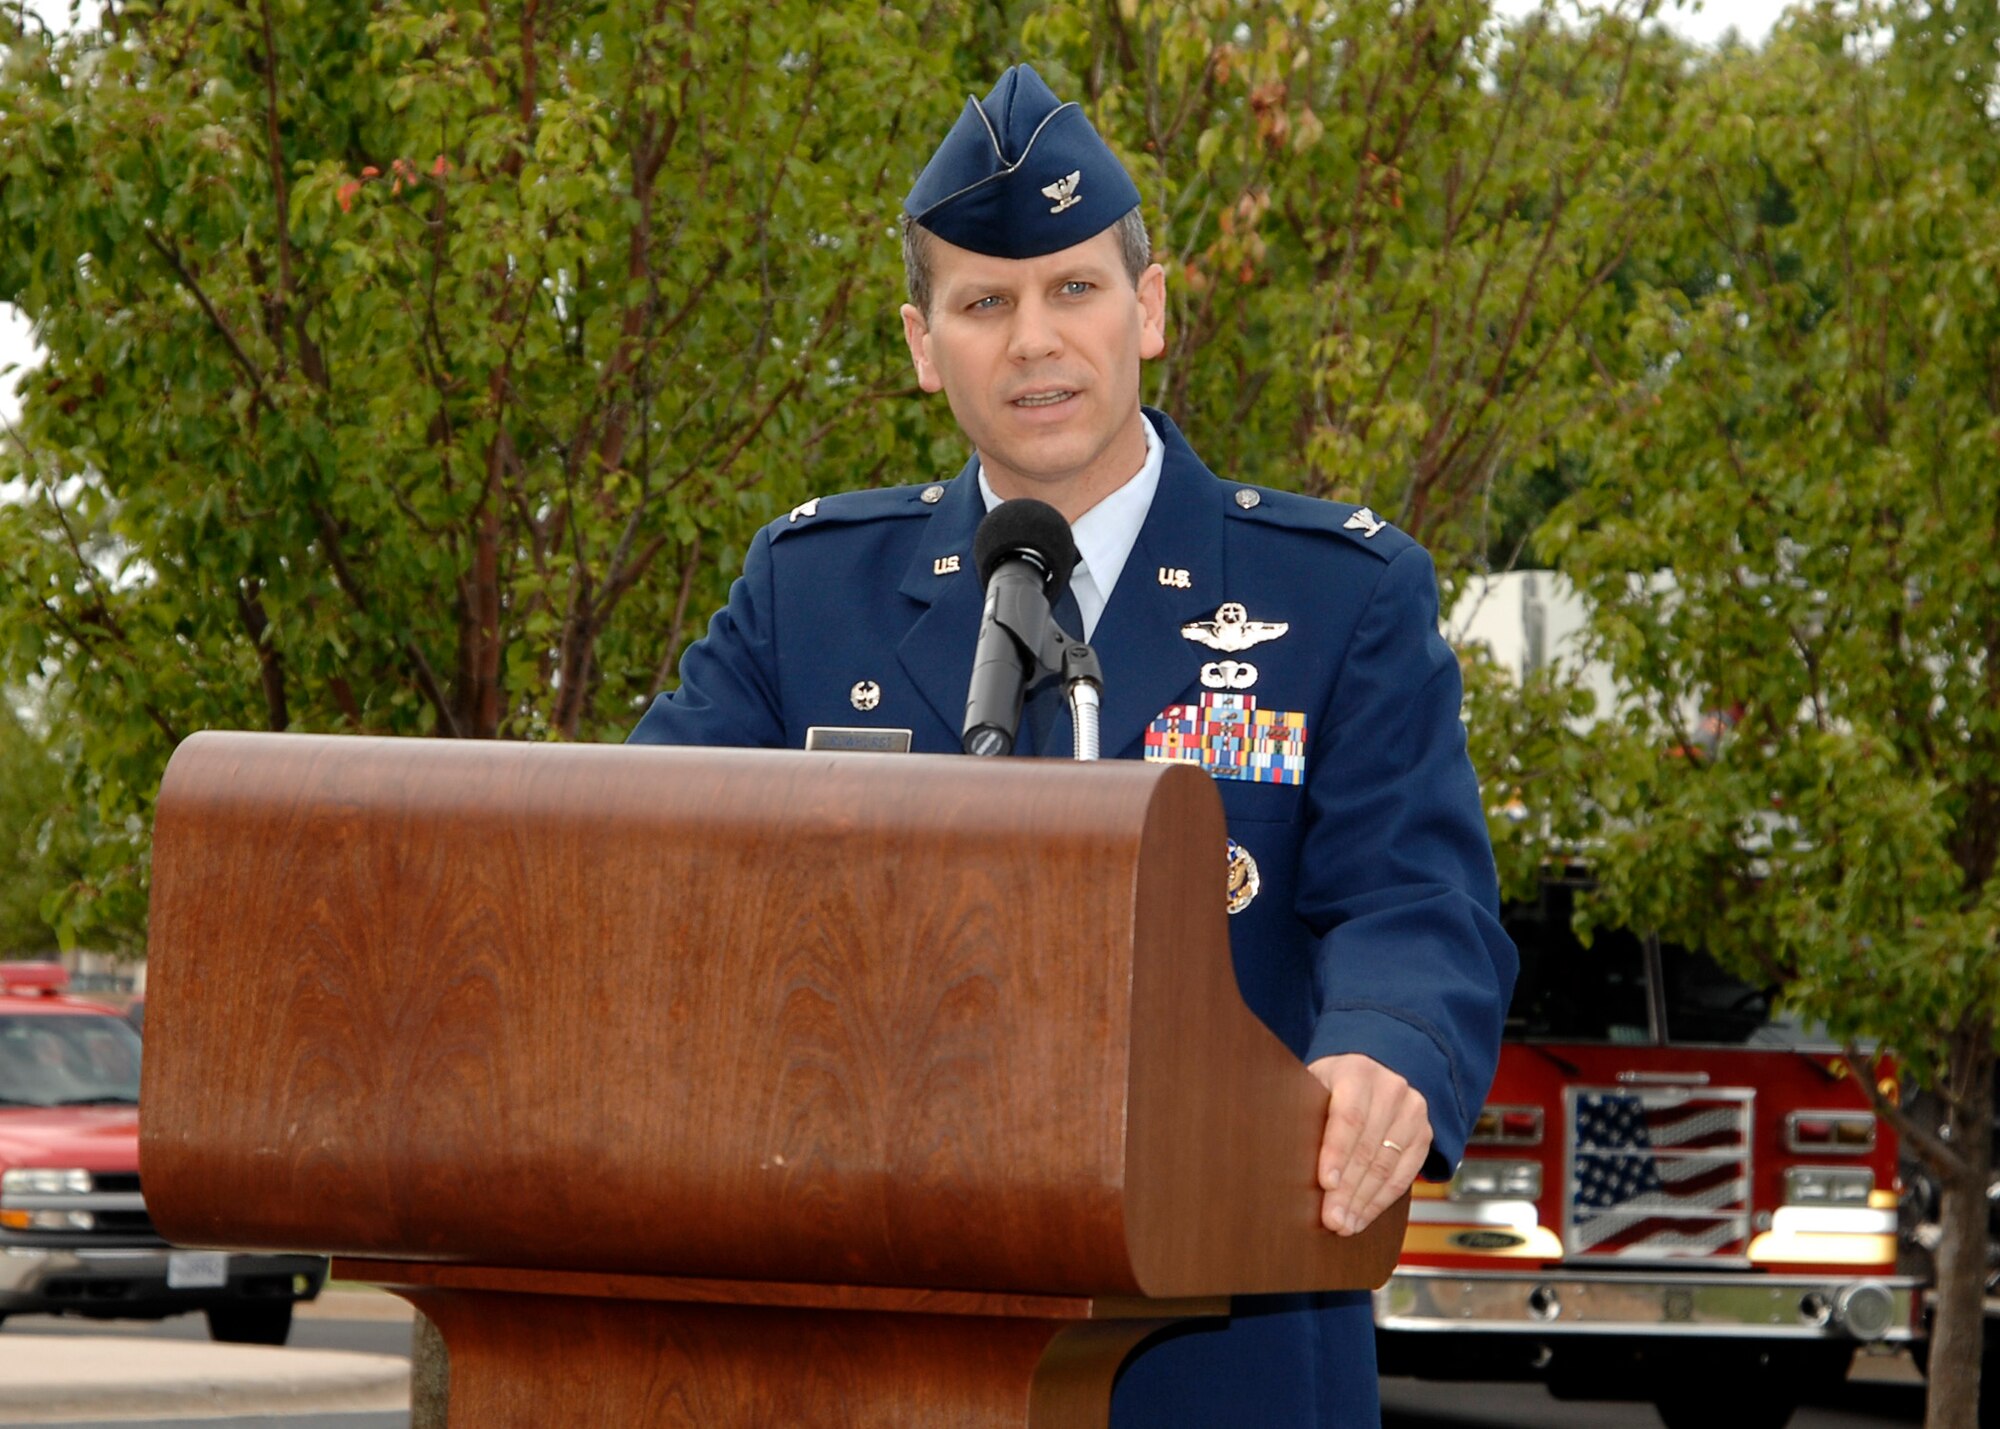 Col. James Crowhurst, 22nd Air Refueling Wing commander, addresses an audience of military and civilian participants during a Patriot Day ceremony, Sept. 11, 2009, at McConnell Air Force Base, Kan. Military first responders from the 22nd Civil Engineer Squadron, 22nd Security Forces Squadron and 22nd Medical Group joined their civilian counterparts to pay respect to those who lost their lives Sept. 11, 2001. (U.S. Air Force photo/Senior Airman Anthony Mejia)